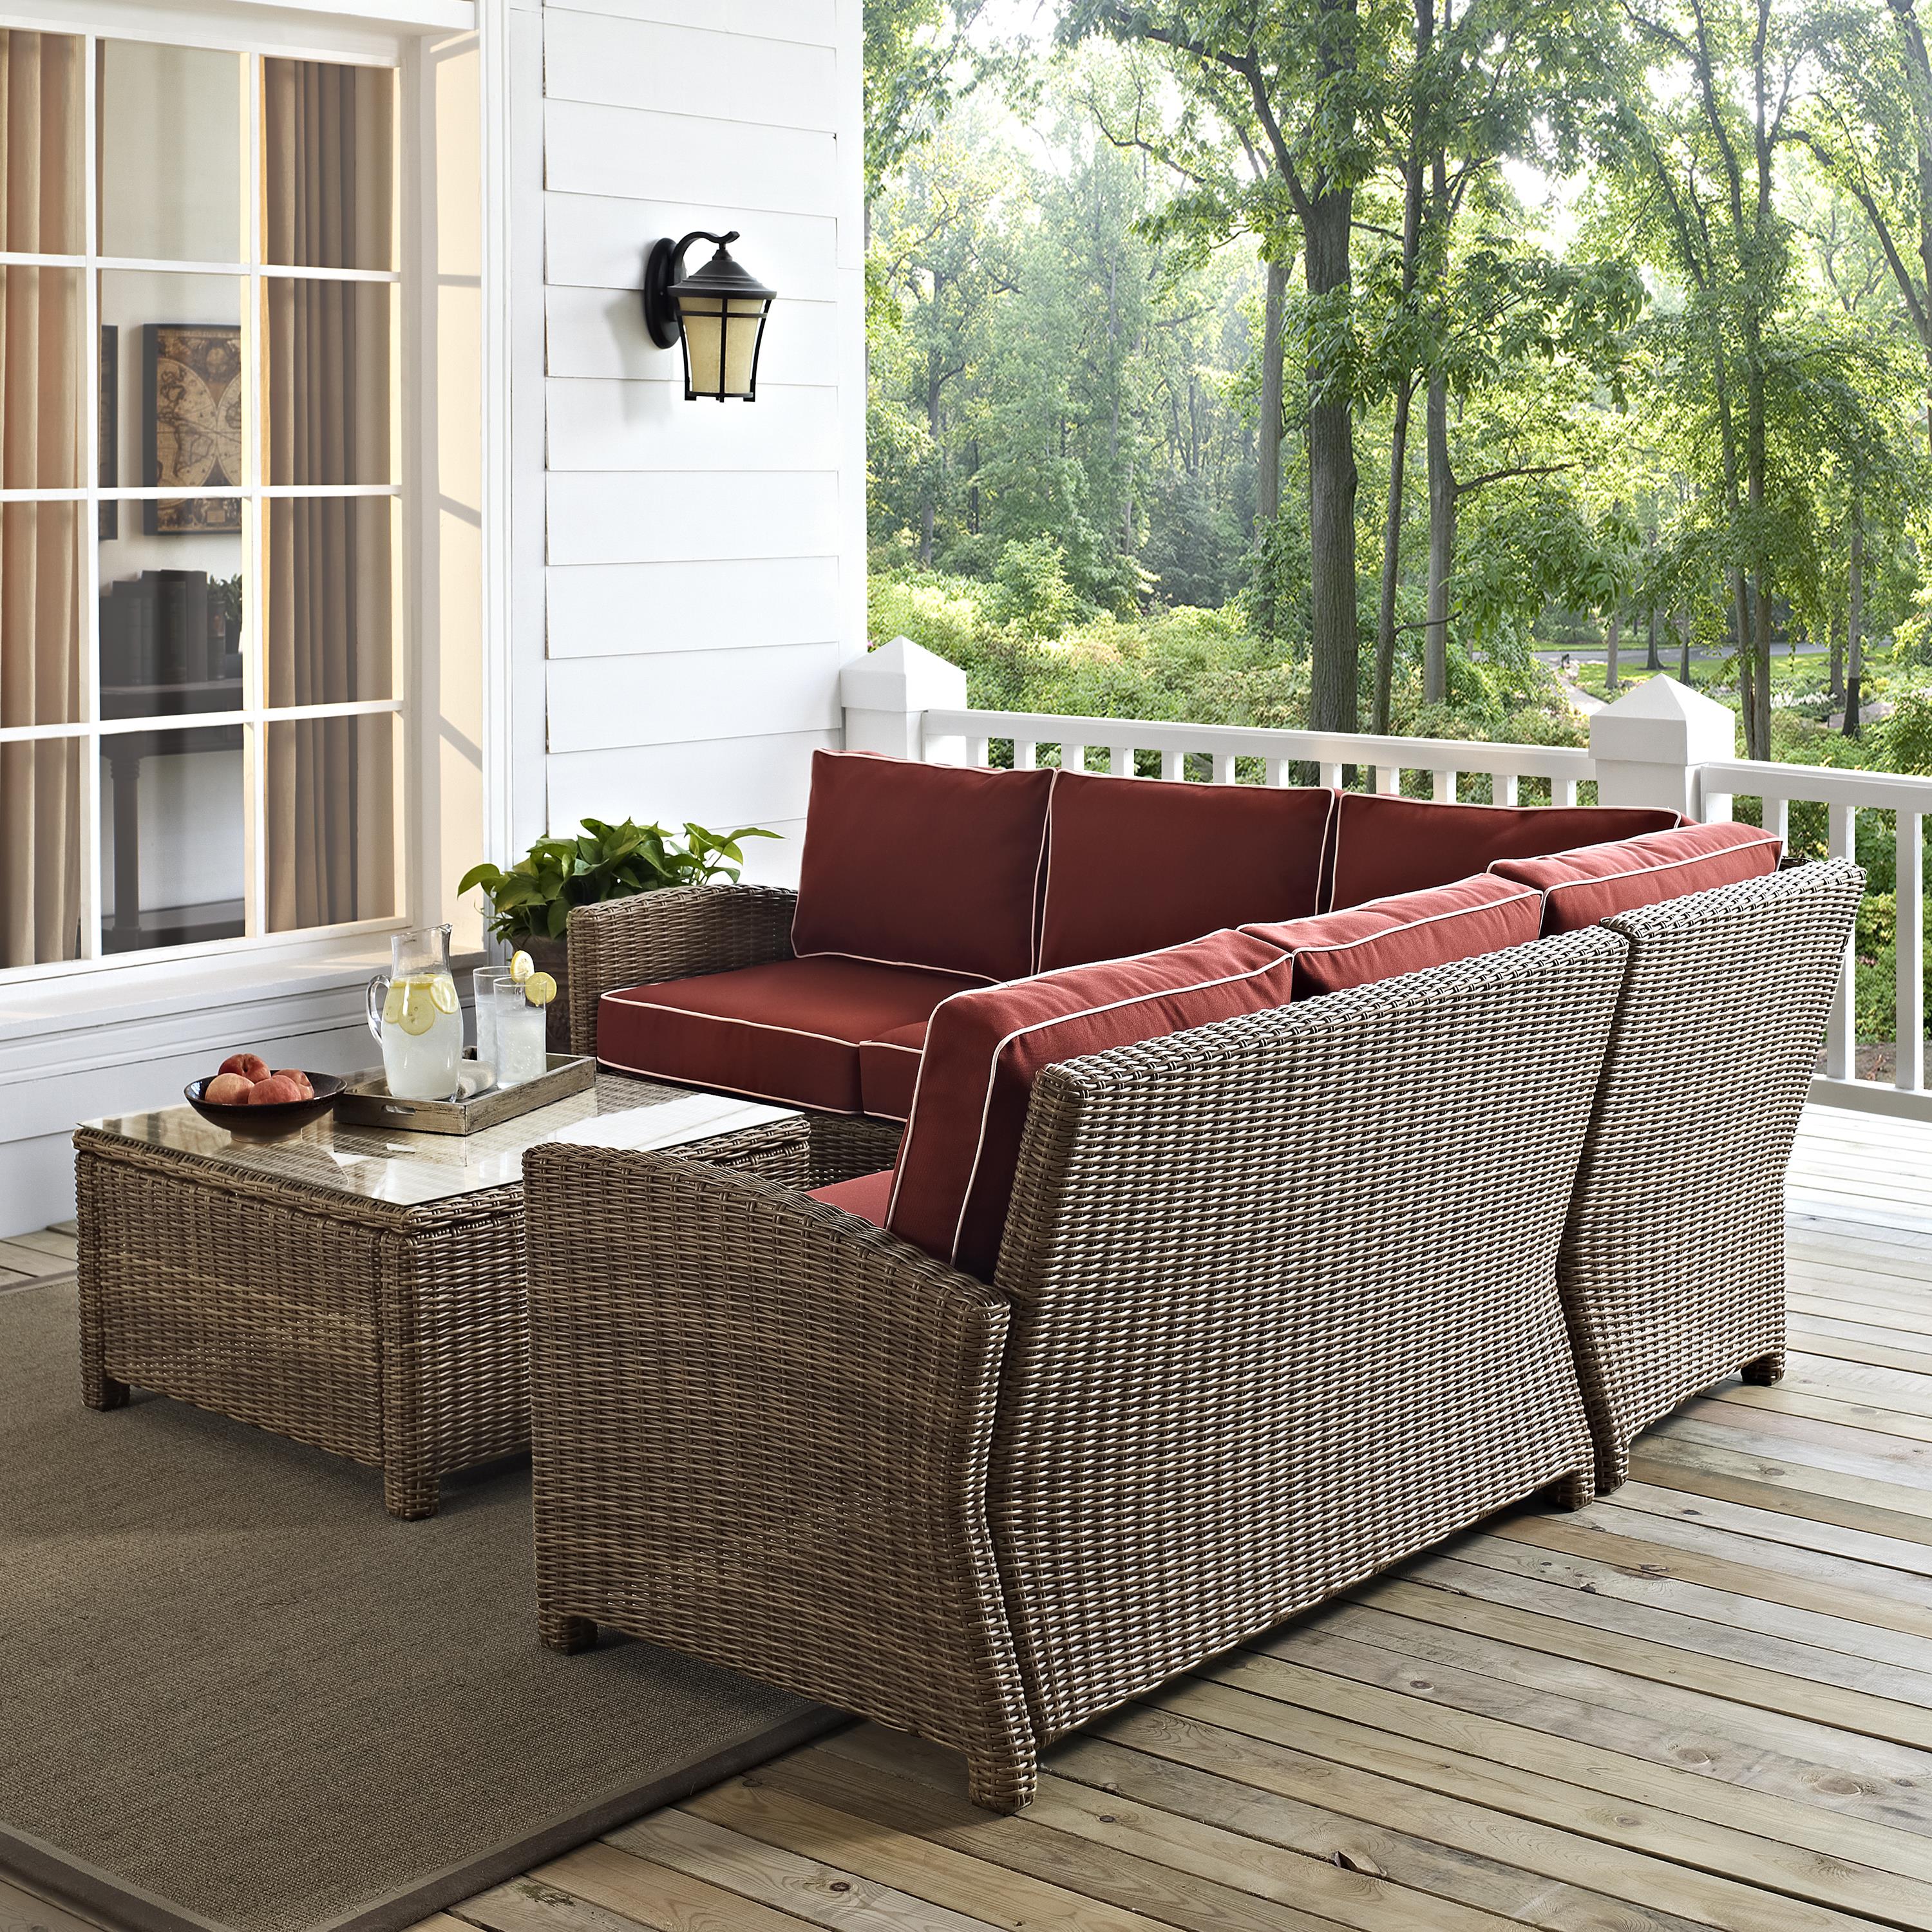 Crosley Furniture Bradenton 4-Piece Outdoor Wicker Seating Set with Sangria Cushions - Right Corner Loveseat, Left Corner Loveseat, Corner Chair, Sectional Glass Top Coffee Table - image 4 of 10